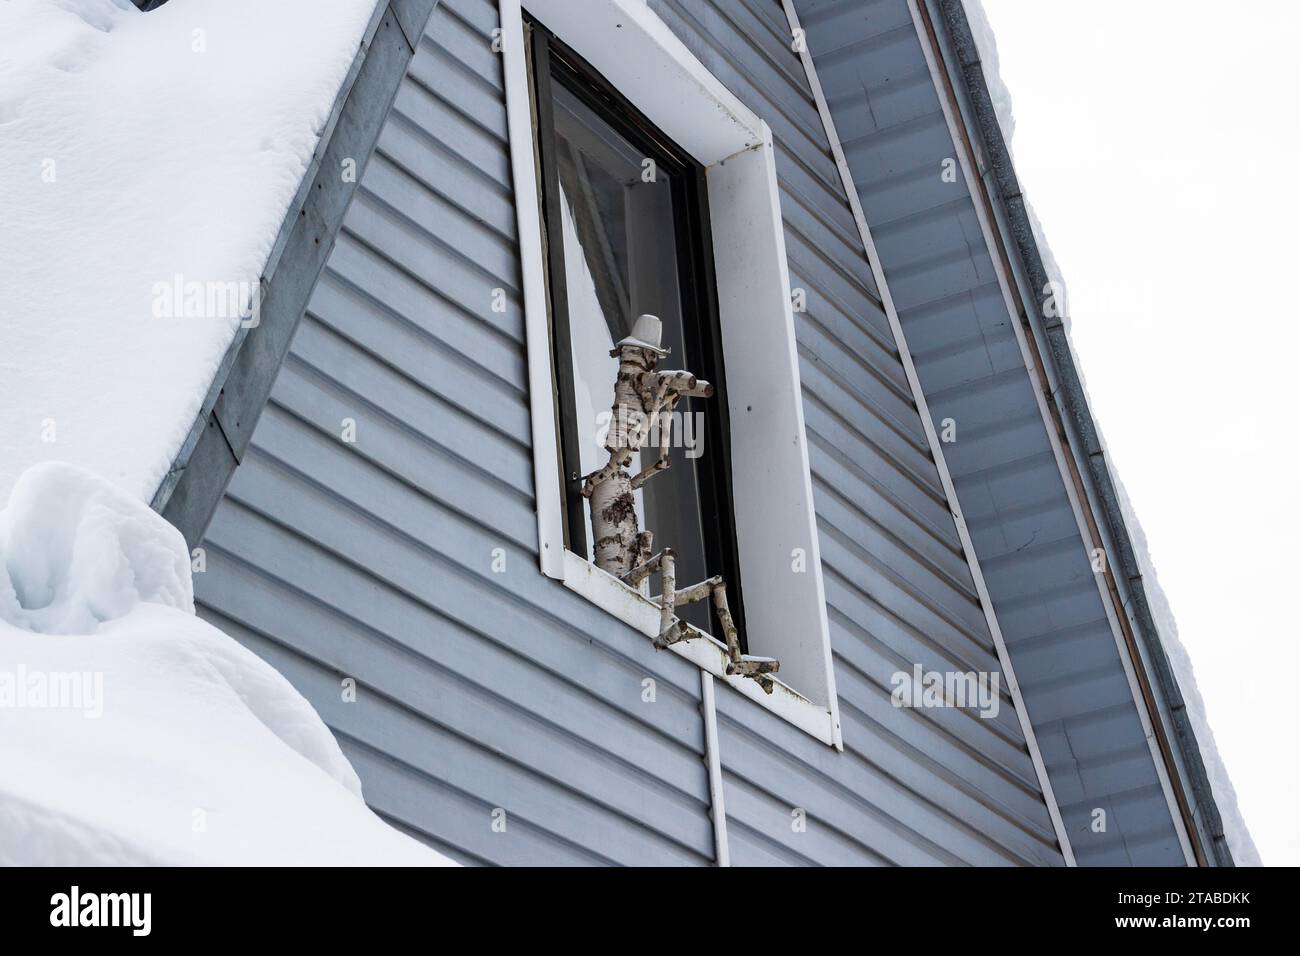 A wooden doll sitting on the window watches the territory Stock Photo